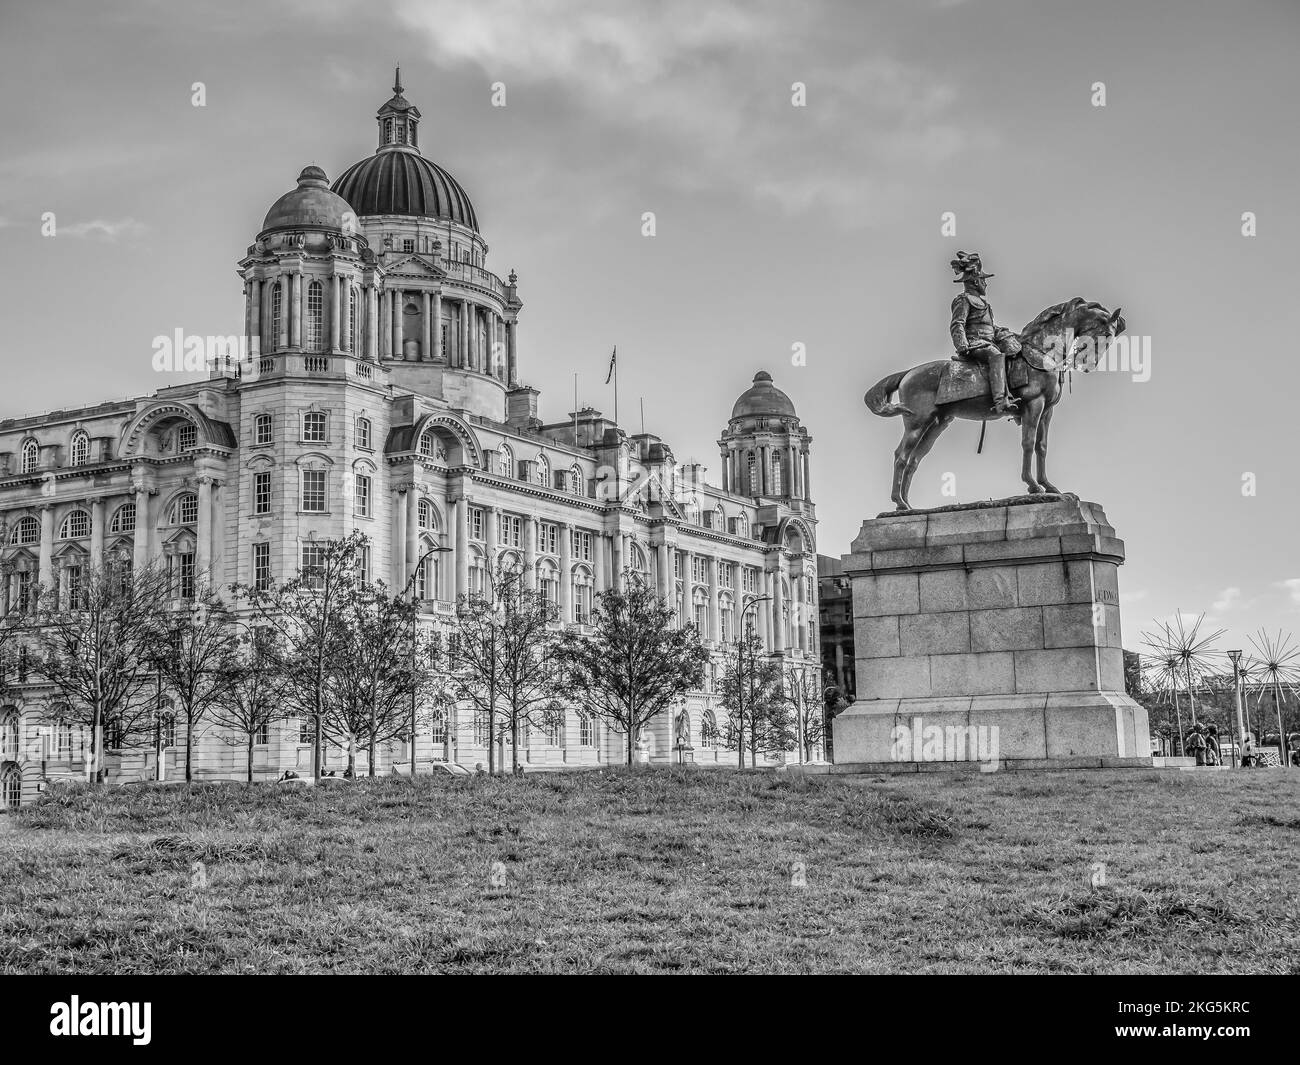 Street scenes in Liverpool seen here from the Pier Head promenade area looking towards the Royal Liver buildings with the statue of King Edward VII Stock Photo